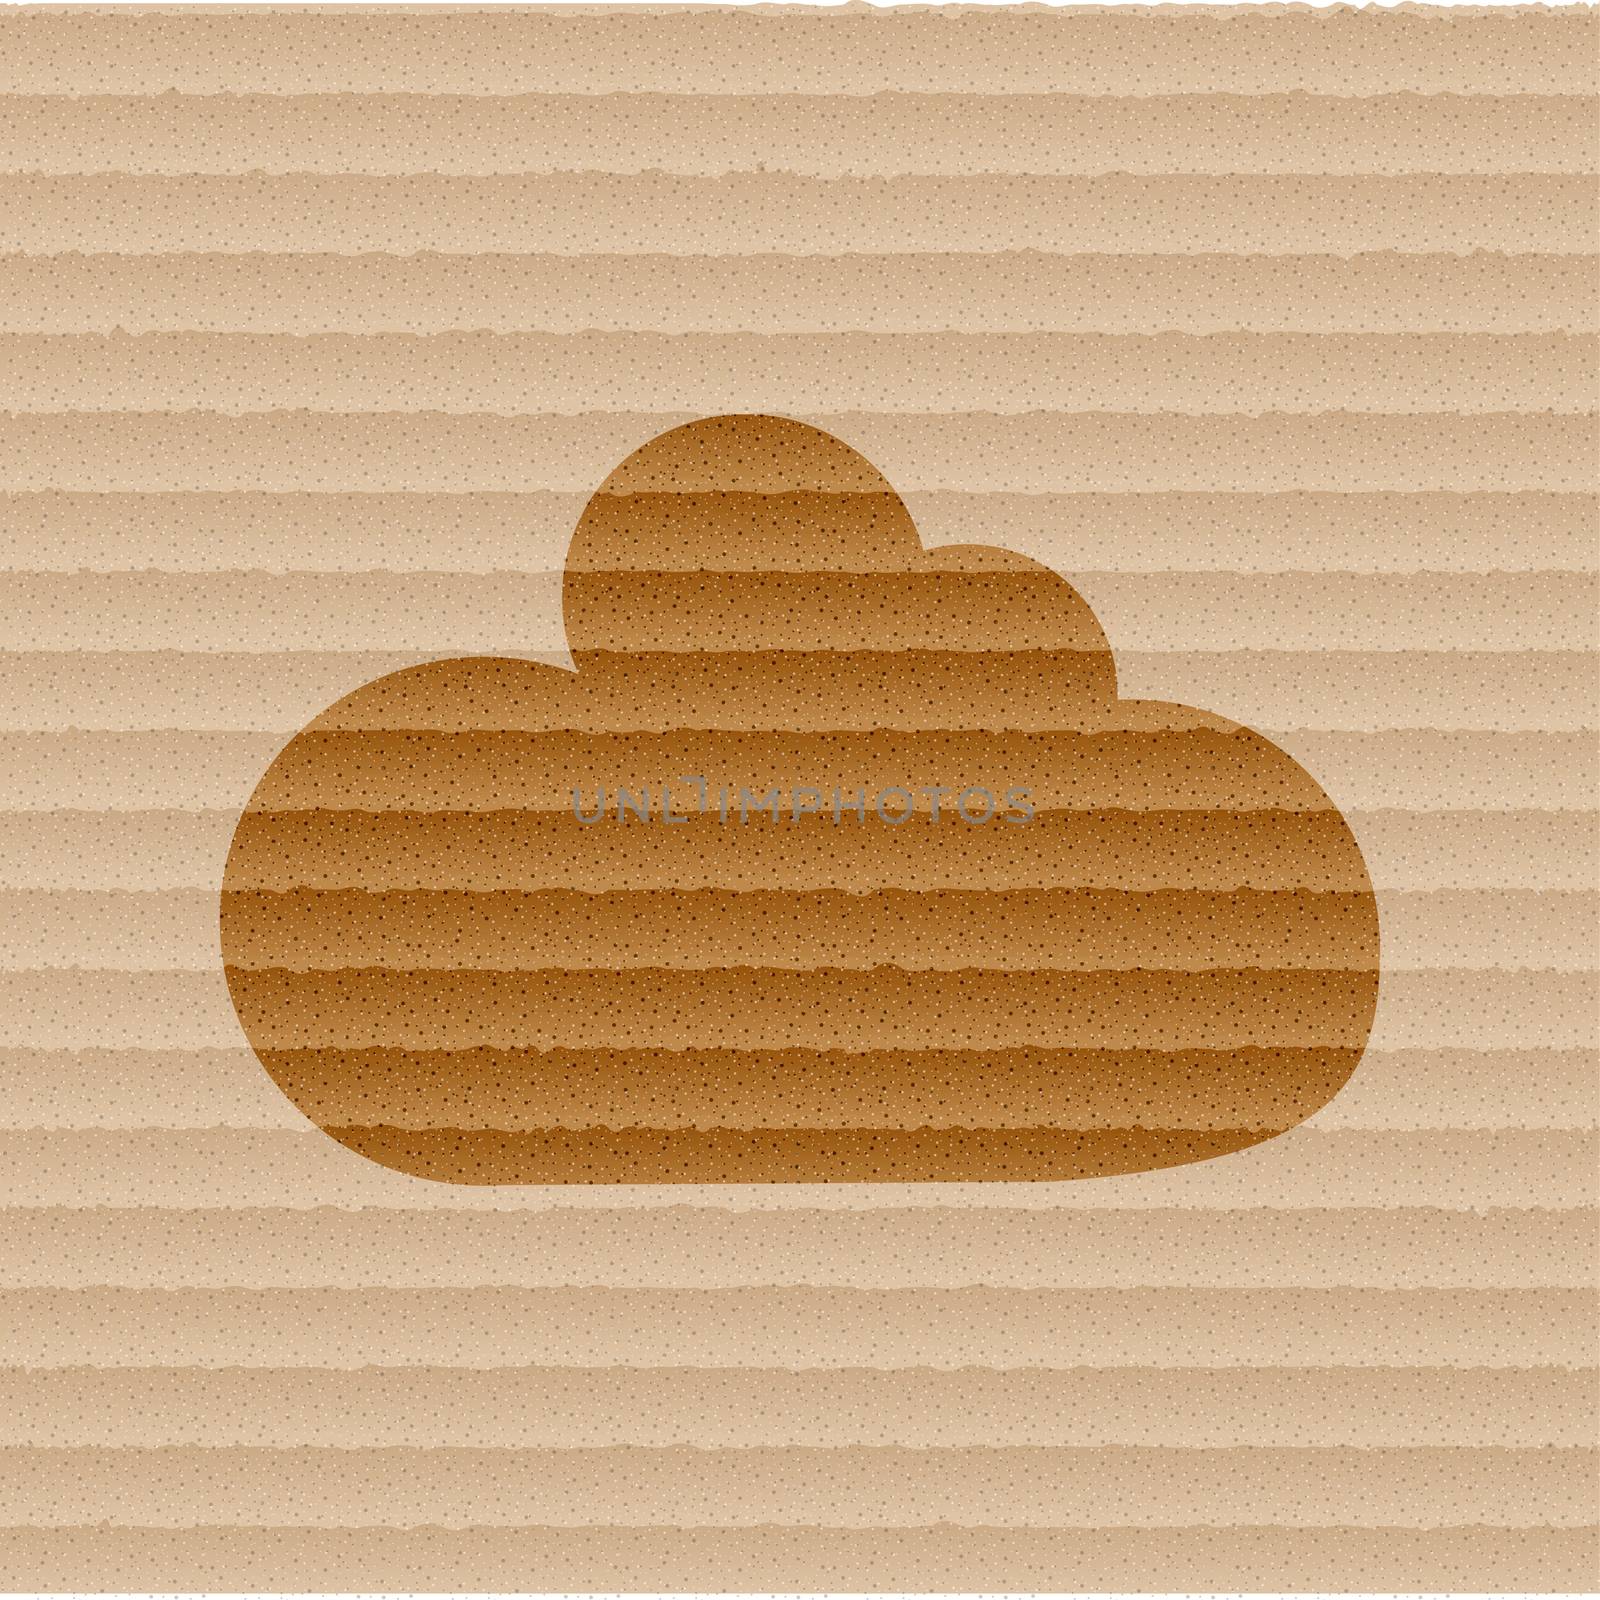 cloud icon. flat design.  Easy to edit.